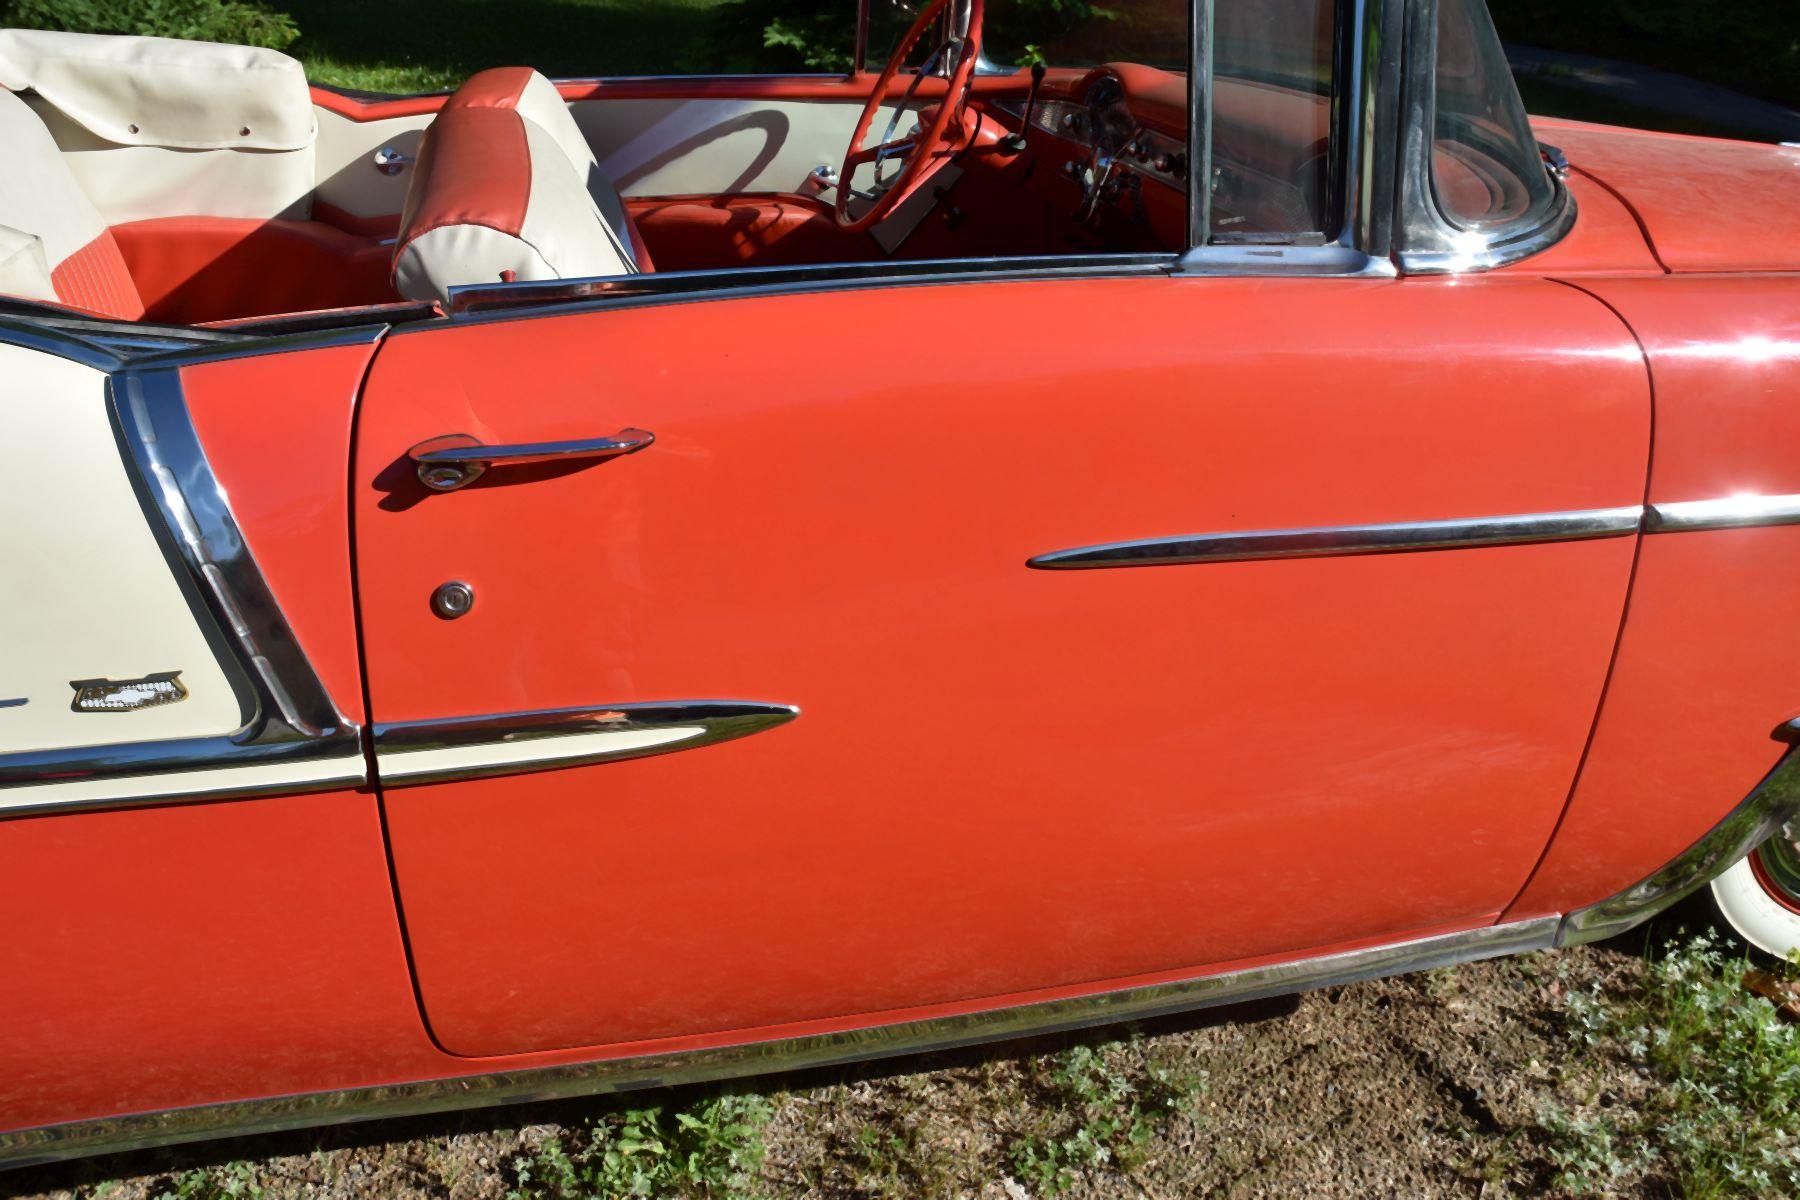 1955 Chevy Belair Convertible Red & White 2 Tone With Matching Interior, 265V8, Auto, Power Steering